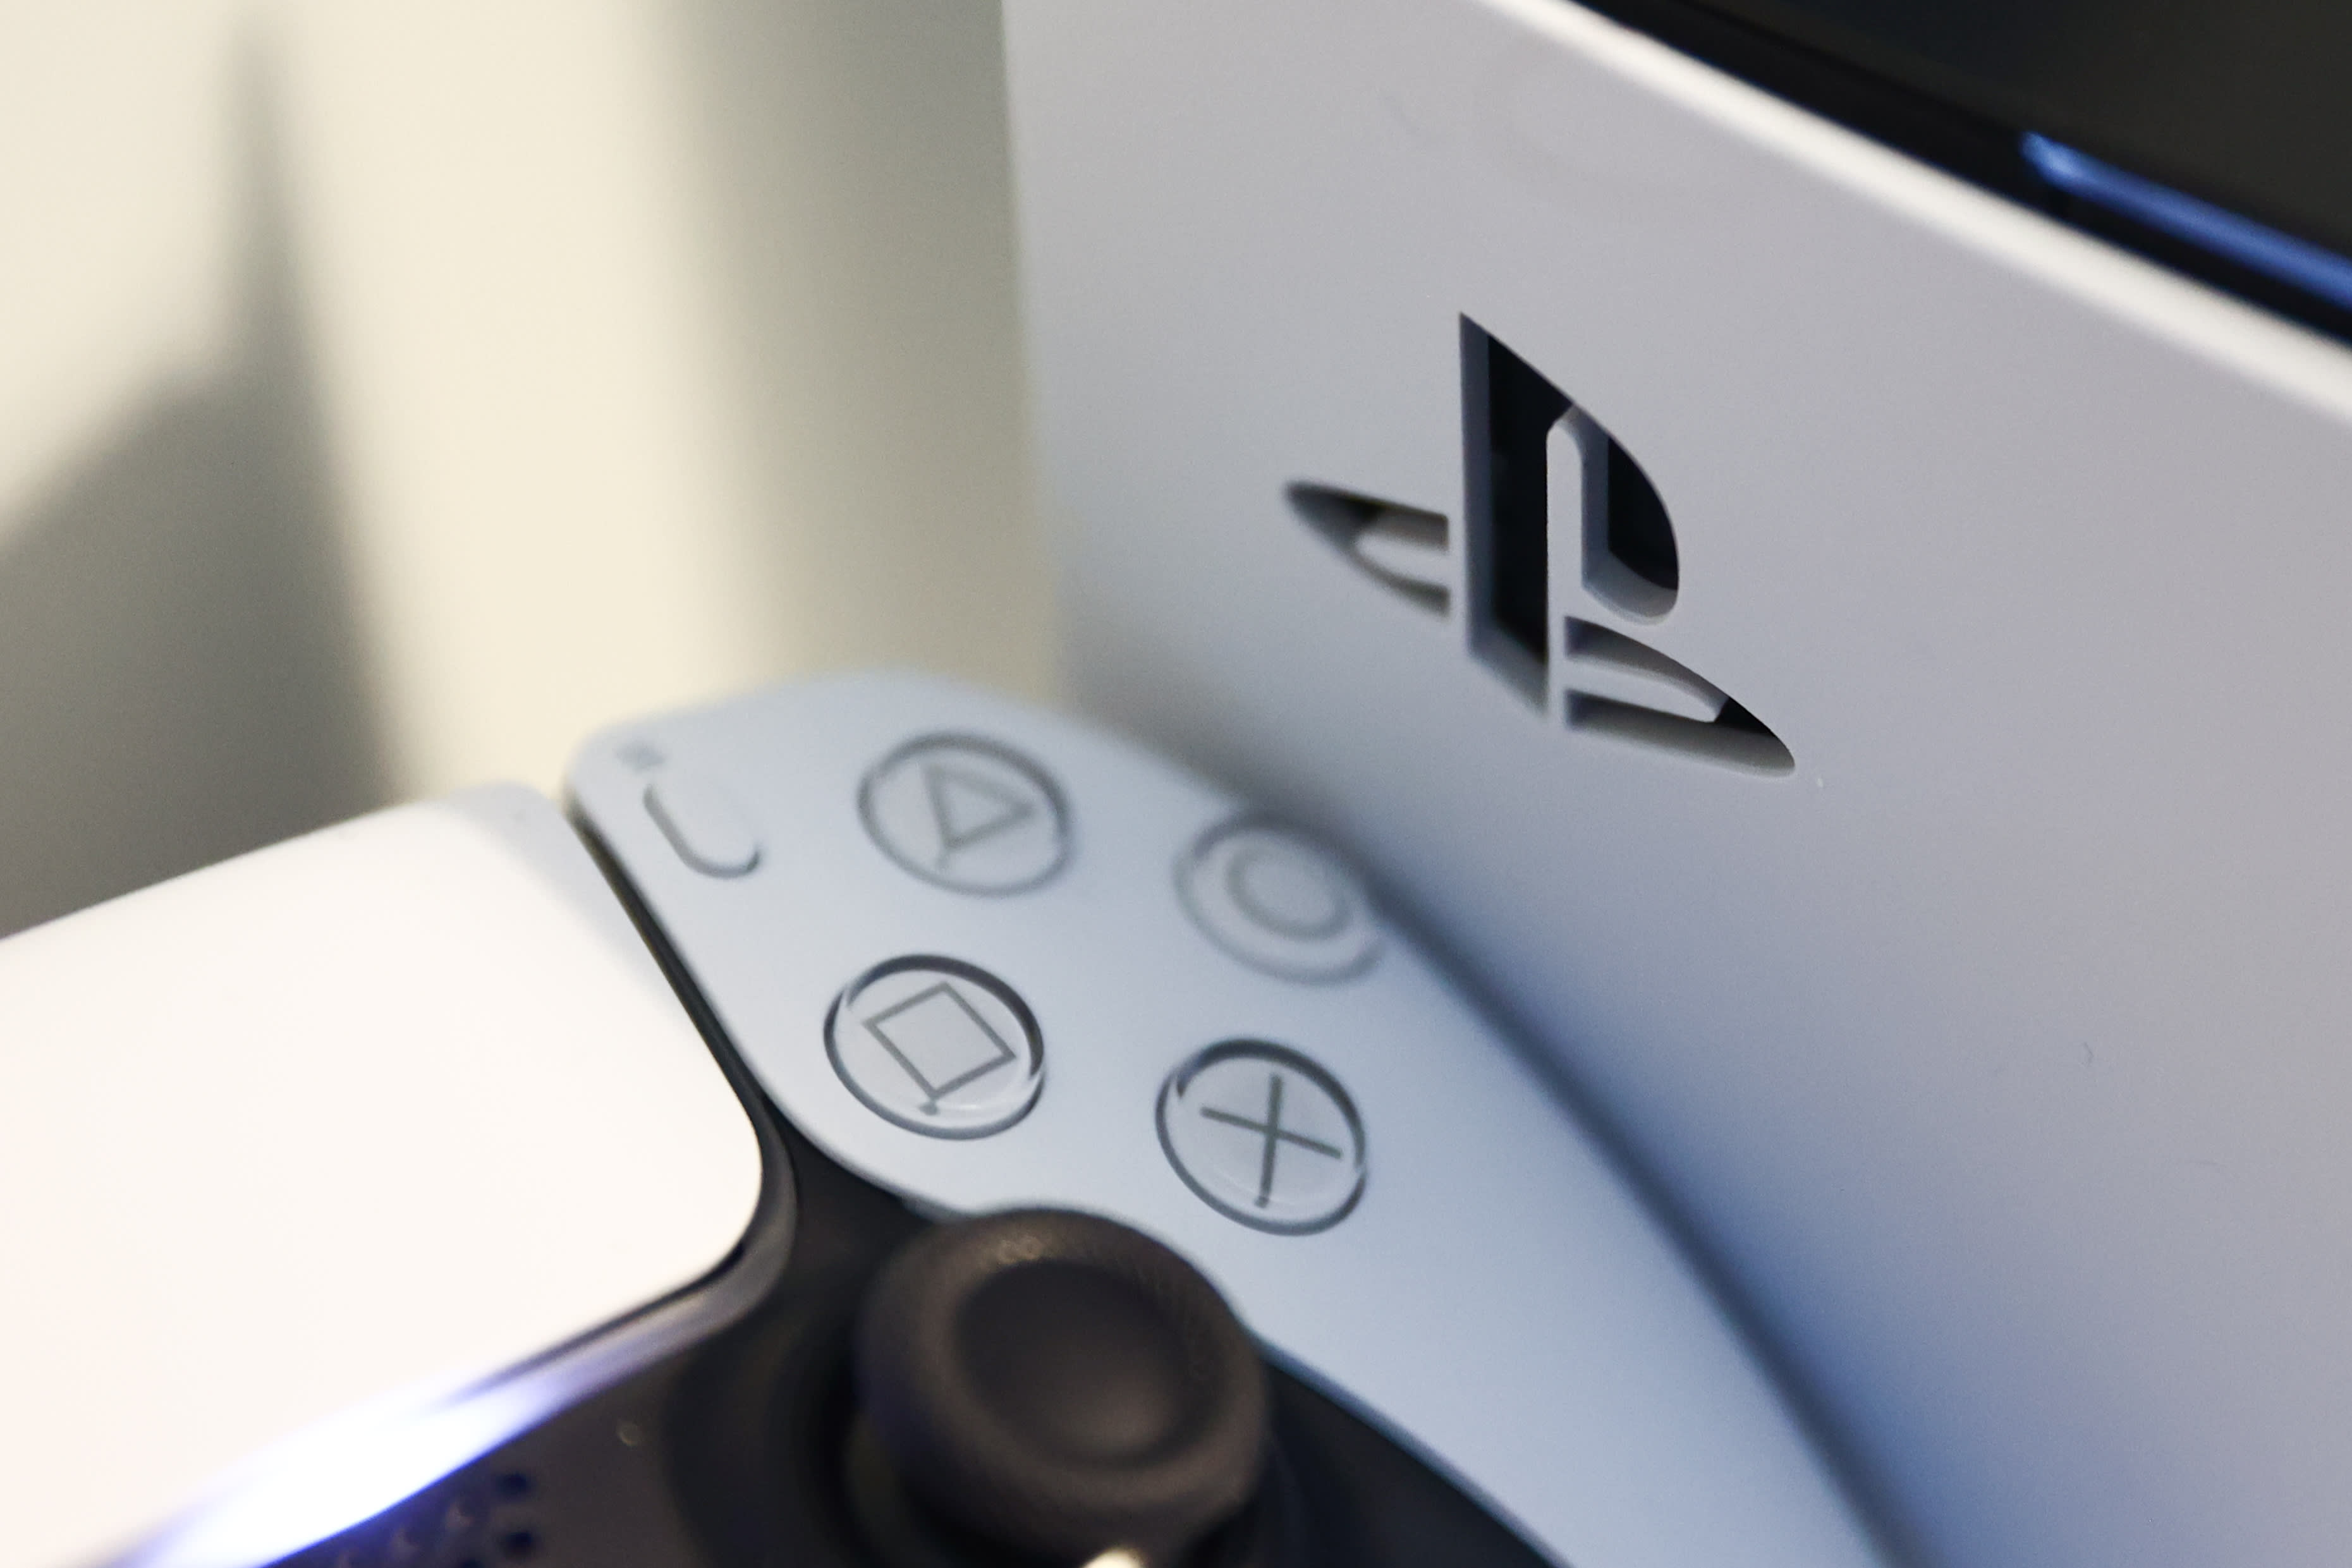 PlayStation Plus is Getting a Major Update, As Sony Completes